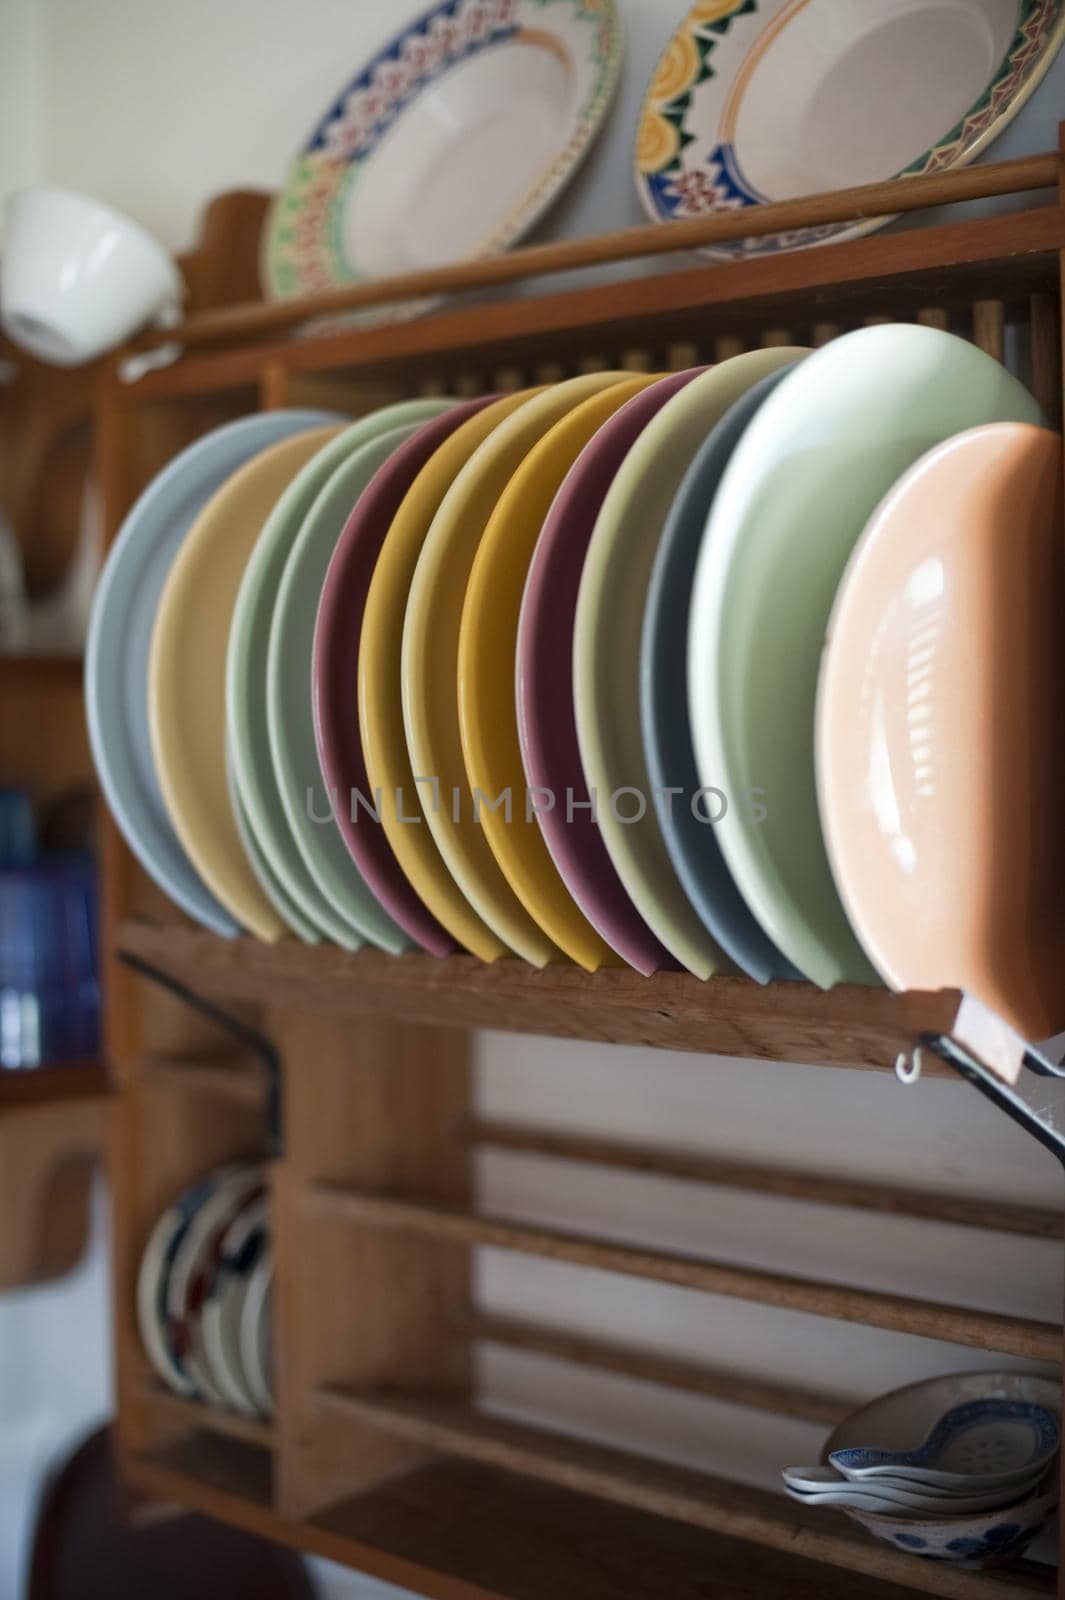 Colorful clean assorted ceramic plates in a wooden plate rack mounted on a kitchen wall in a close up view